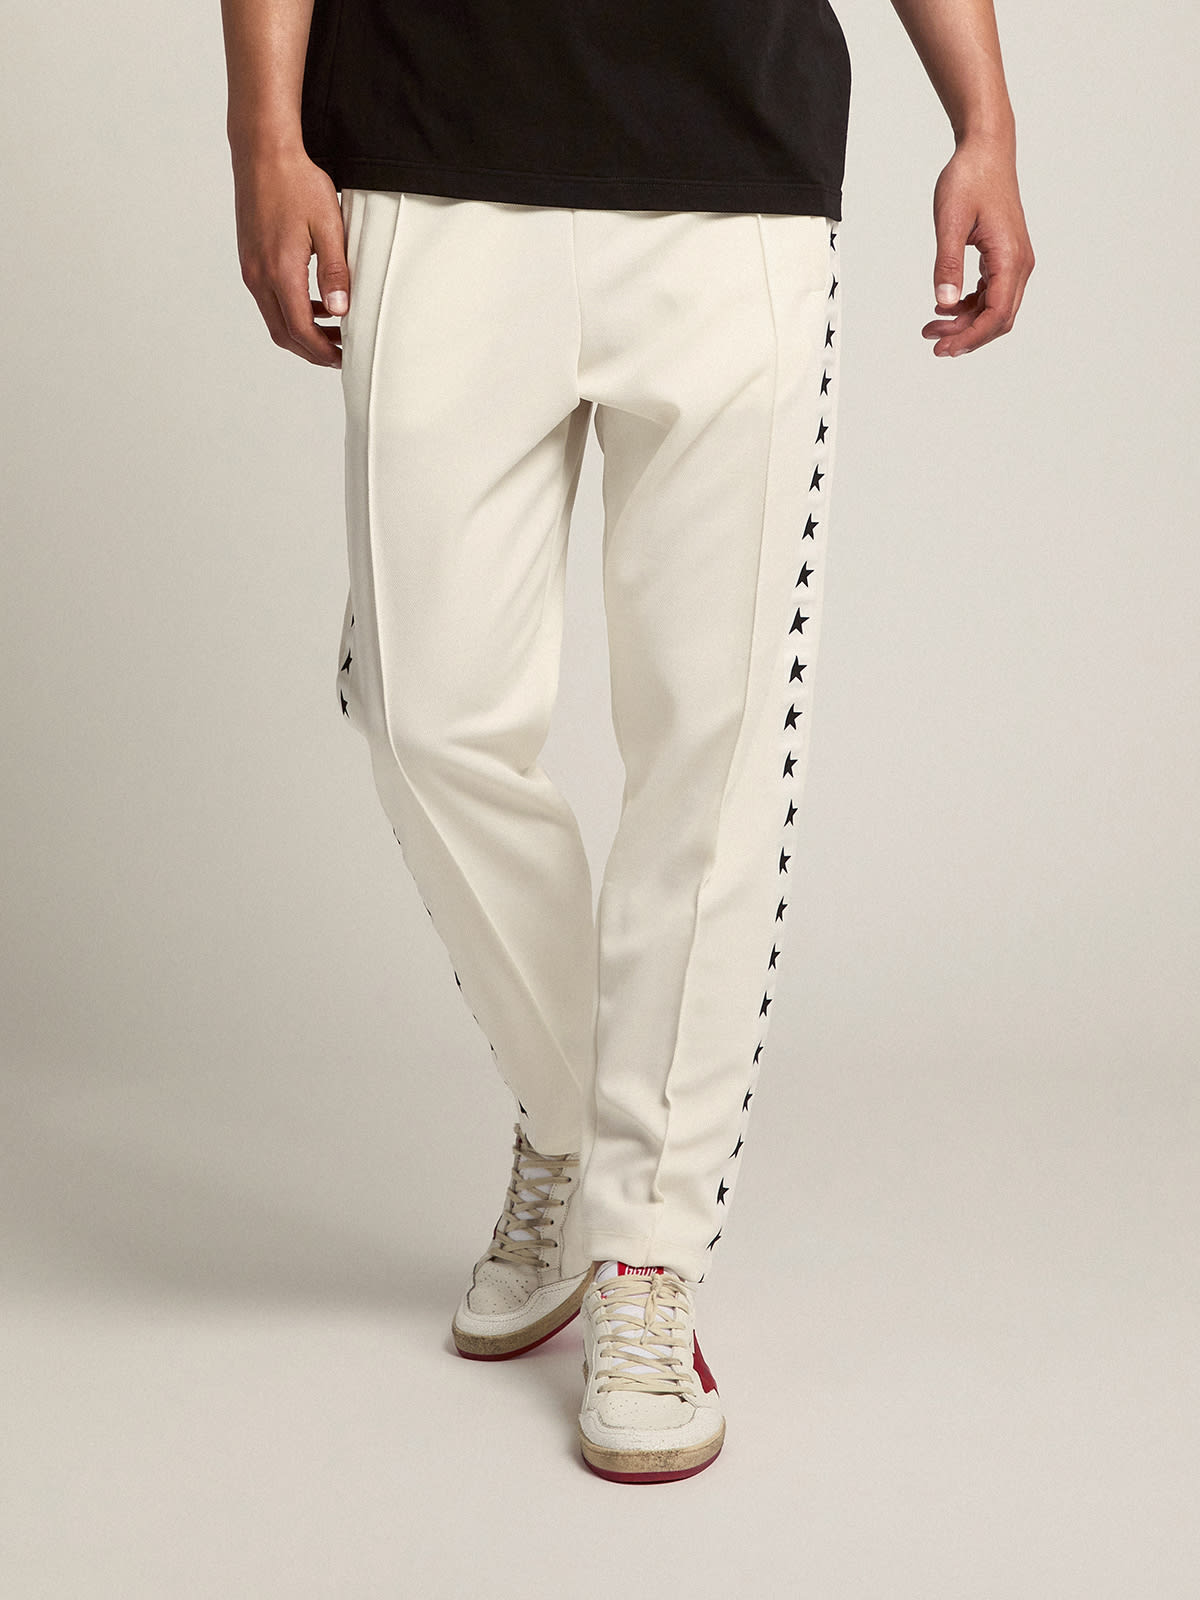 Golden Goose - Men’s white joggers with black stars on the sides in 